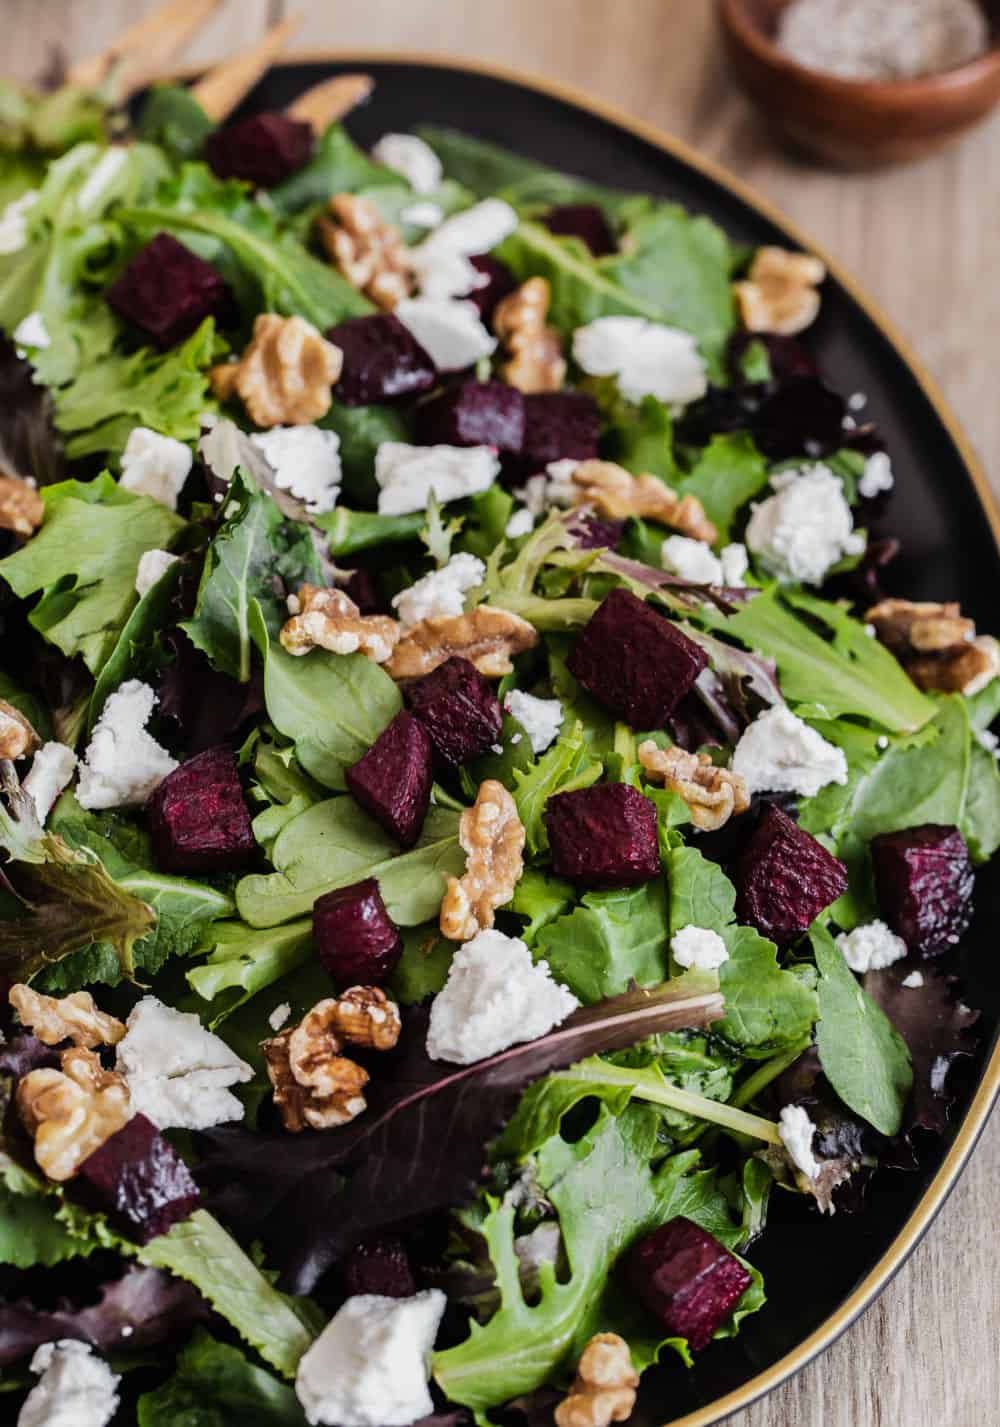 green salad with roasted beets and goat cheese and nuts on black platter.